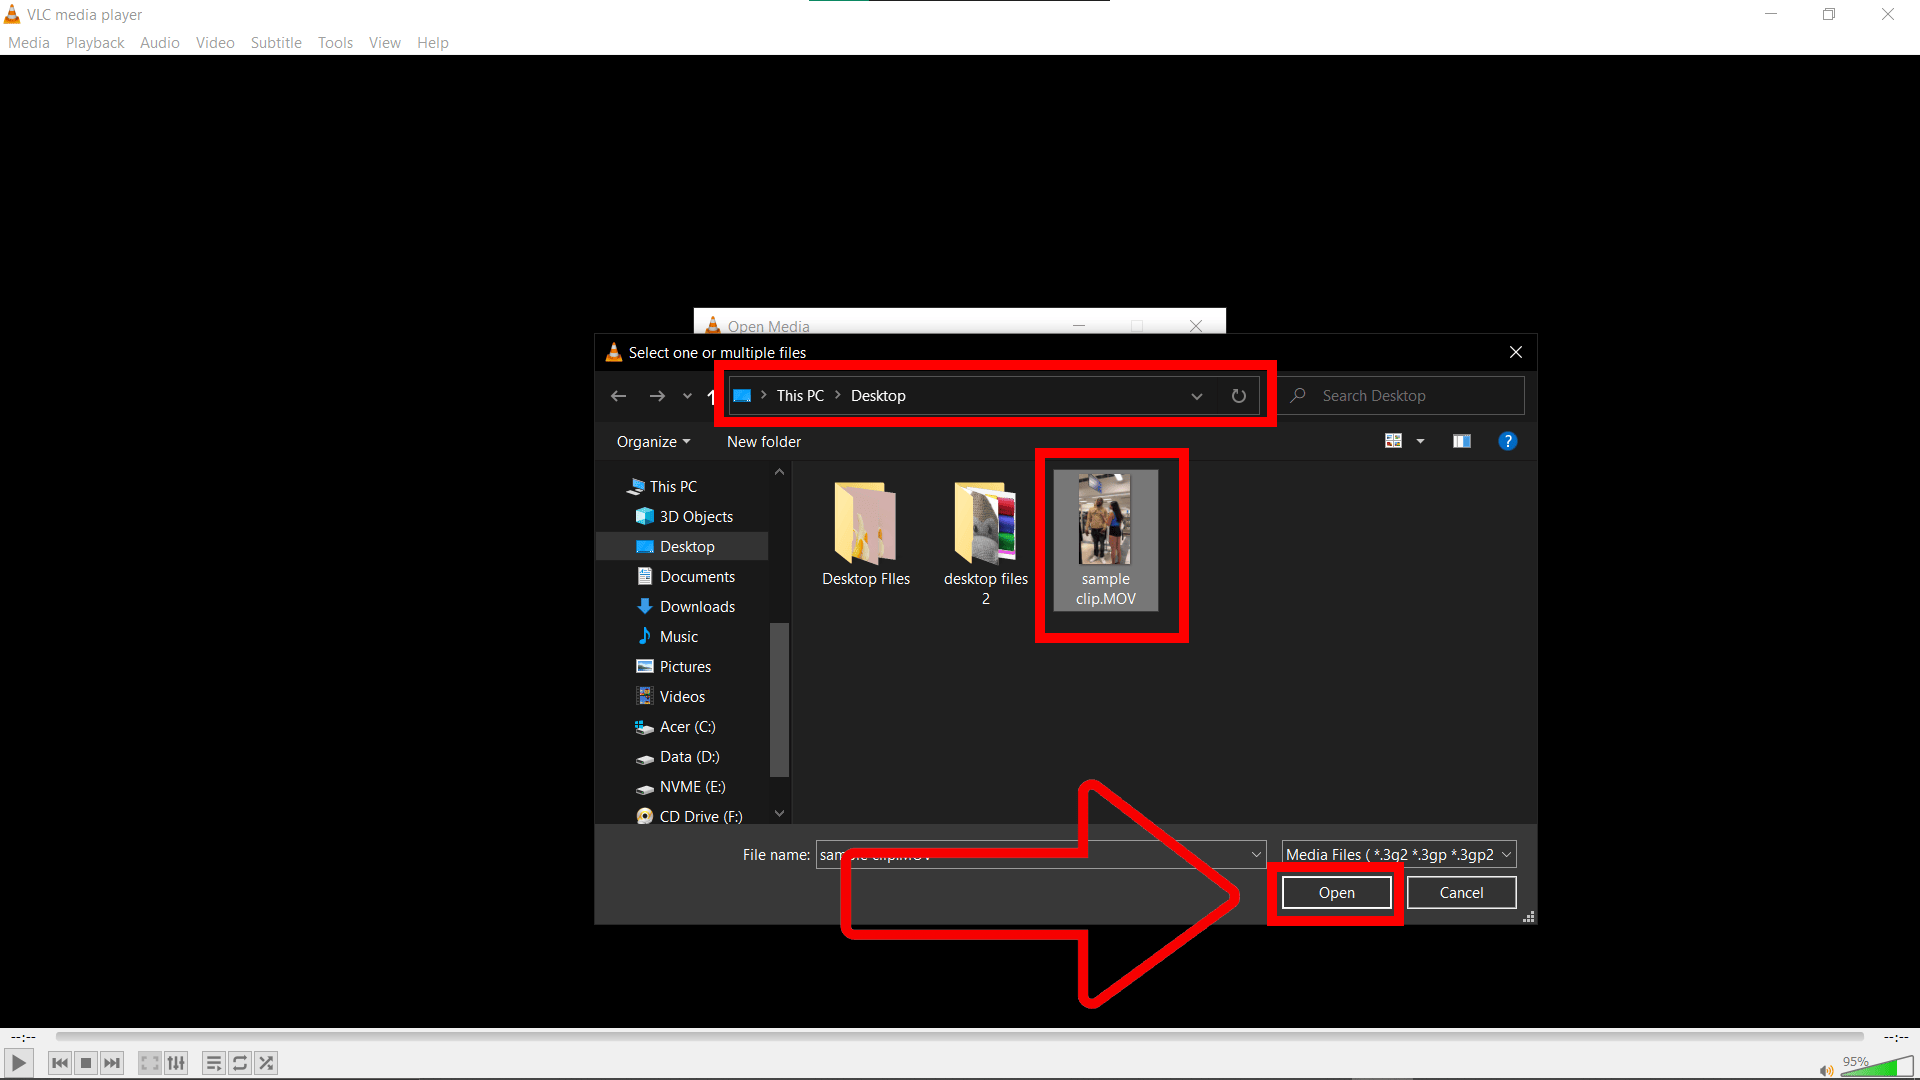 How To Compress Video Files For Free Using VLC Media Player: Step 3